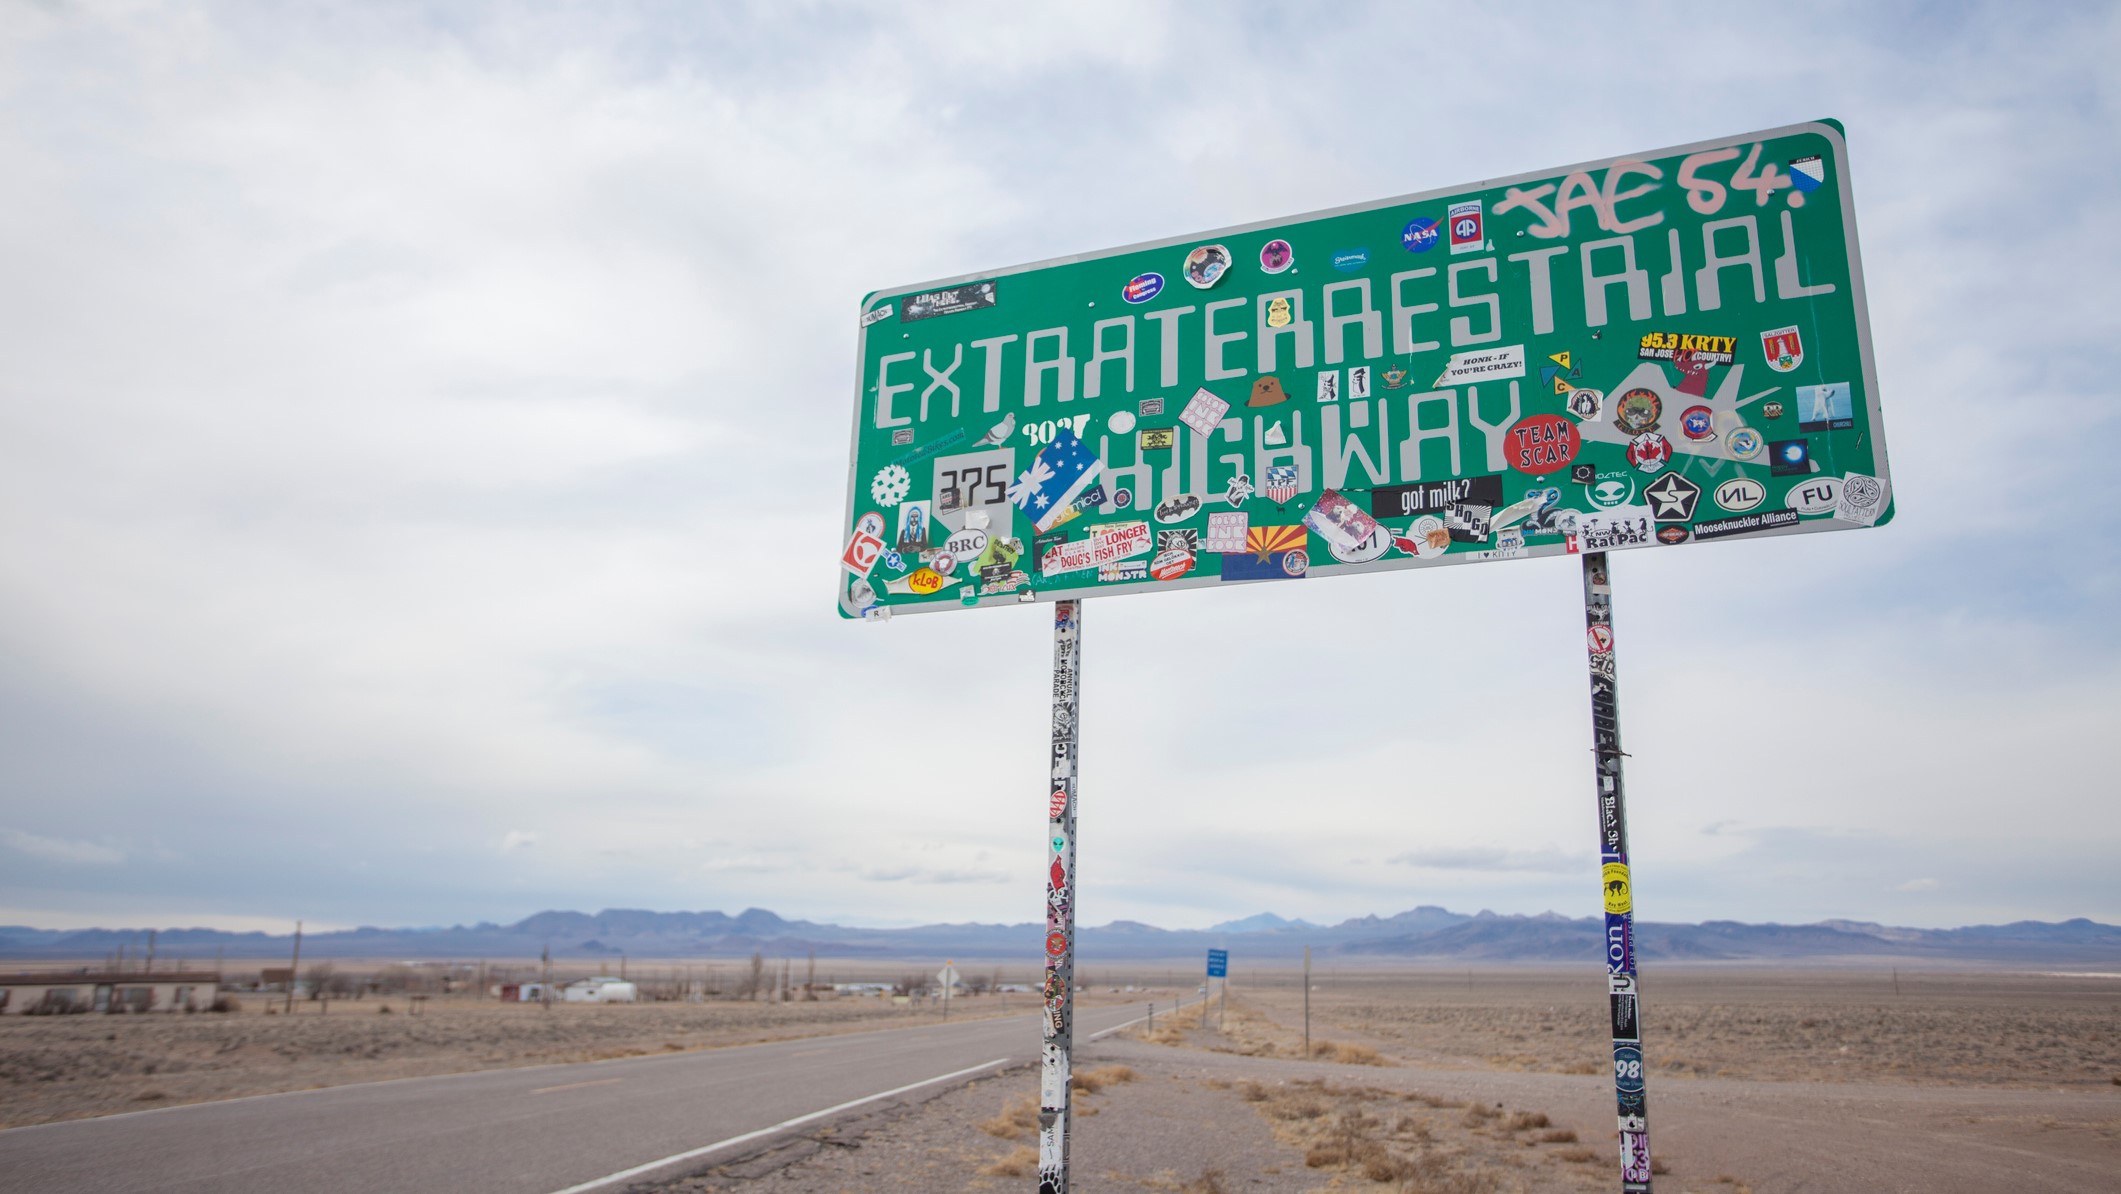 Section 51 is located near State Highway 375. The Extraterrestrial Highway is a popular route for UFO enthusiasts and travel enthusiasts alike.